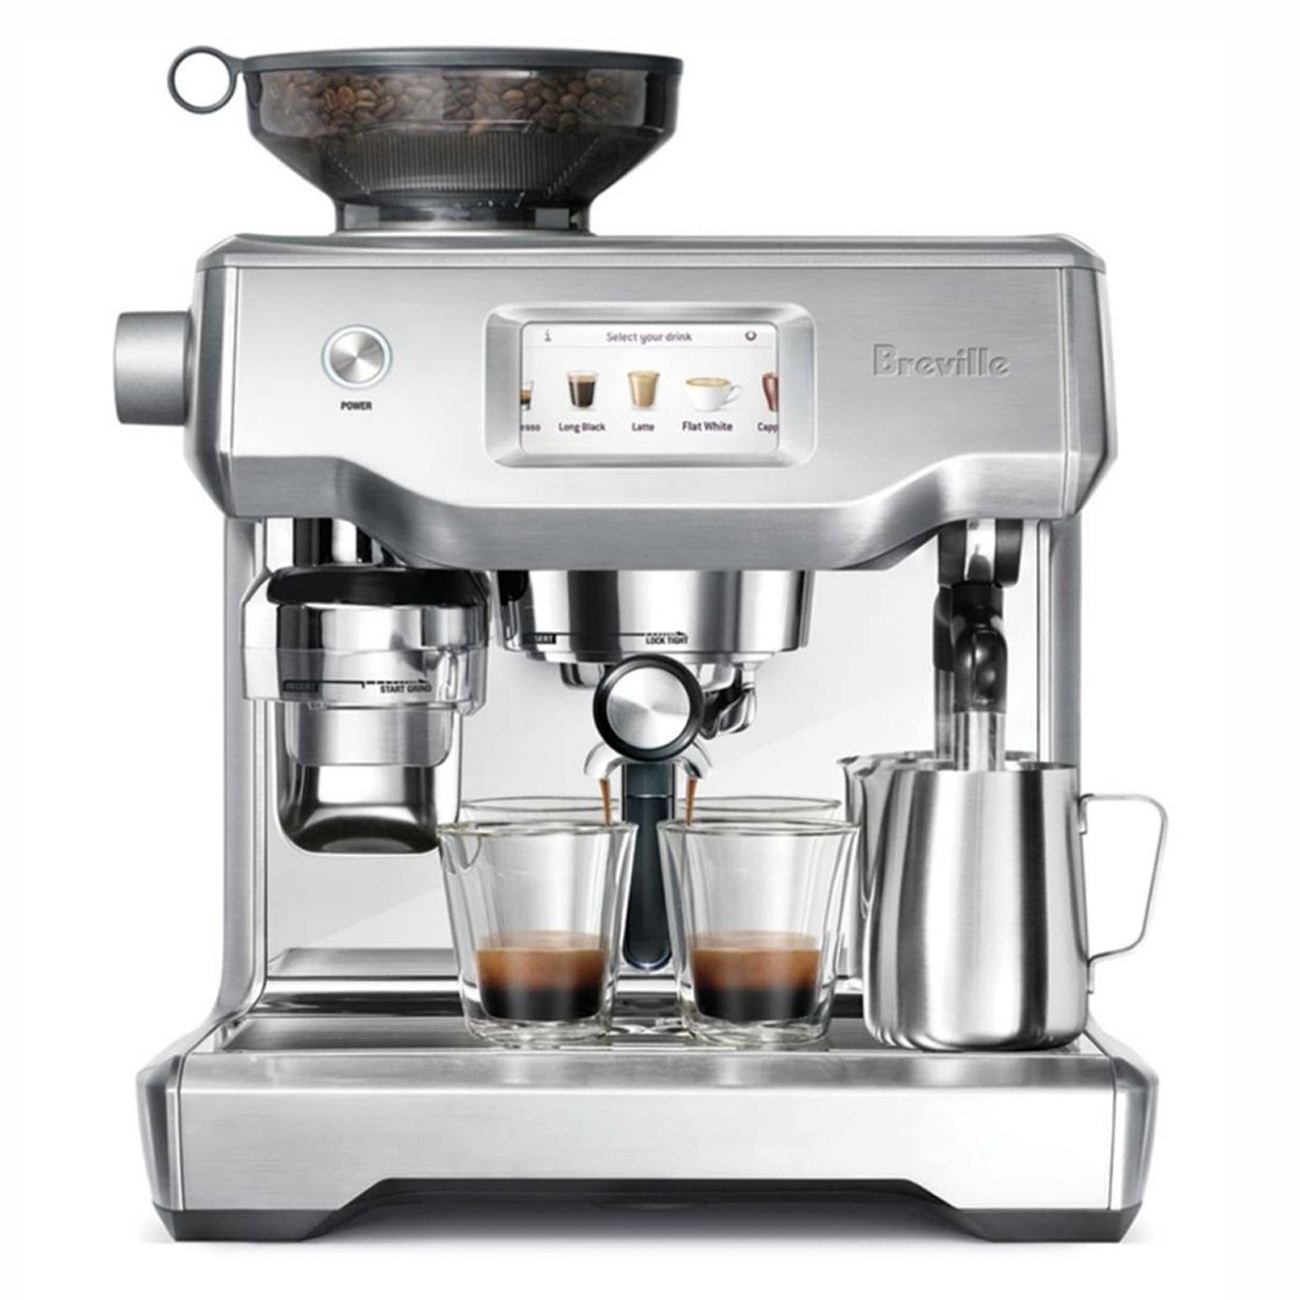 High-end, quick and easy Breville Oracle Espresso Maker by Breville. 